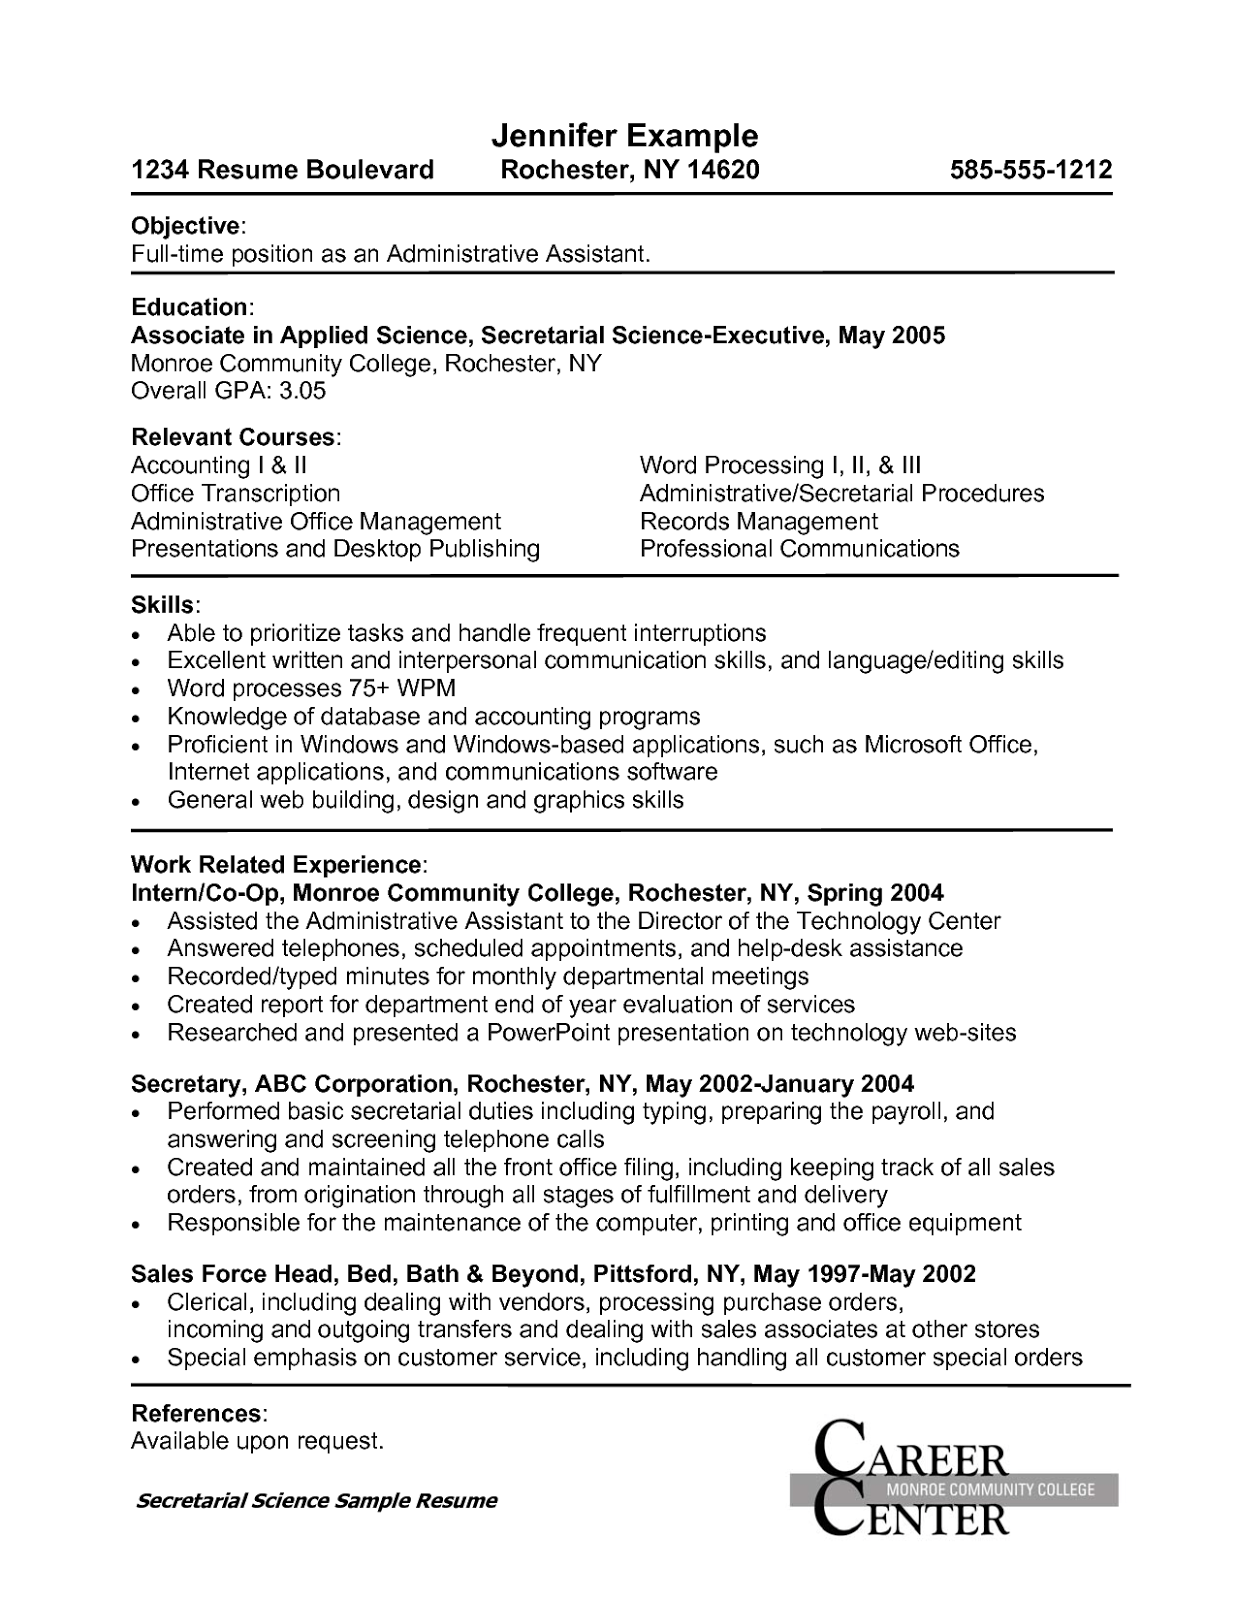 Free resume templates for admin assistant